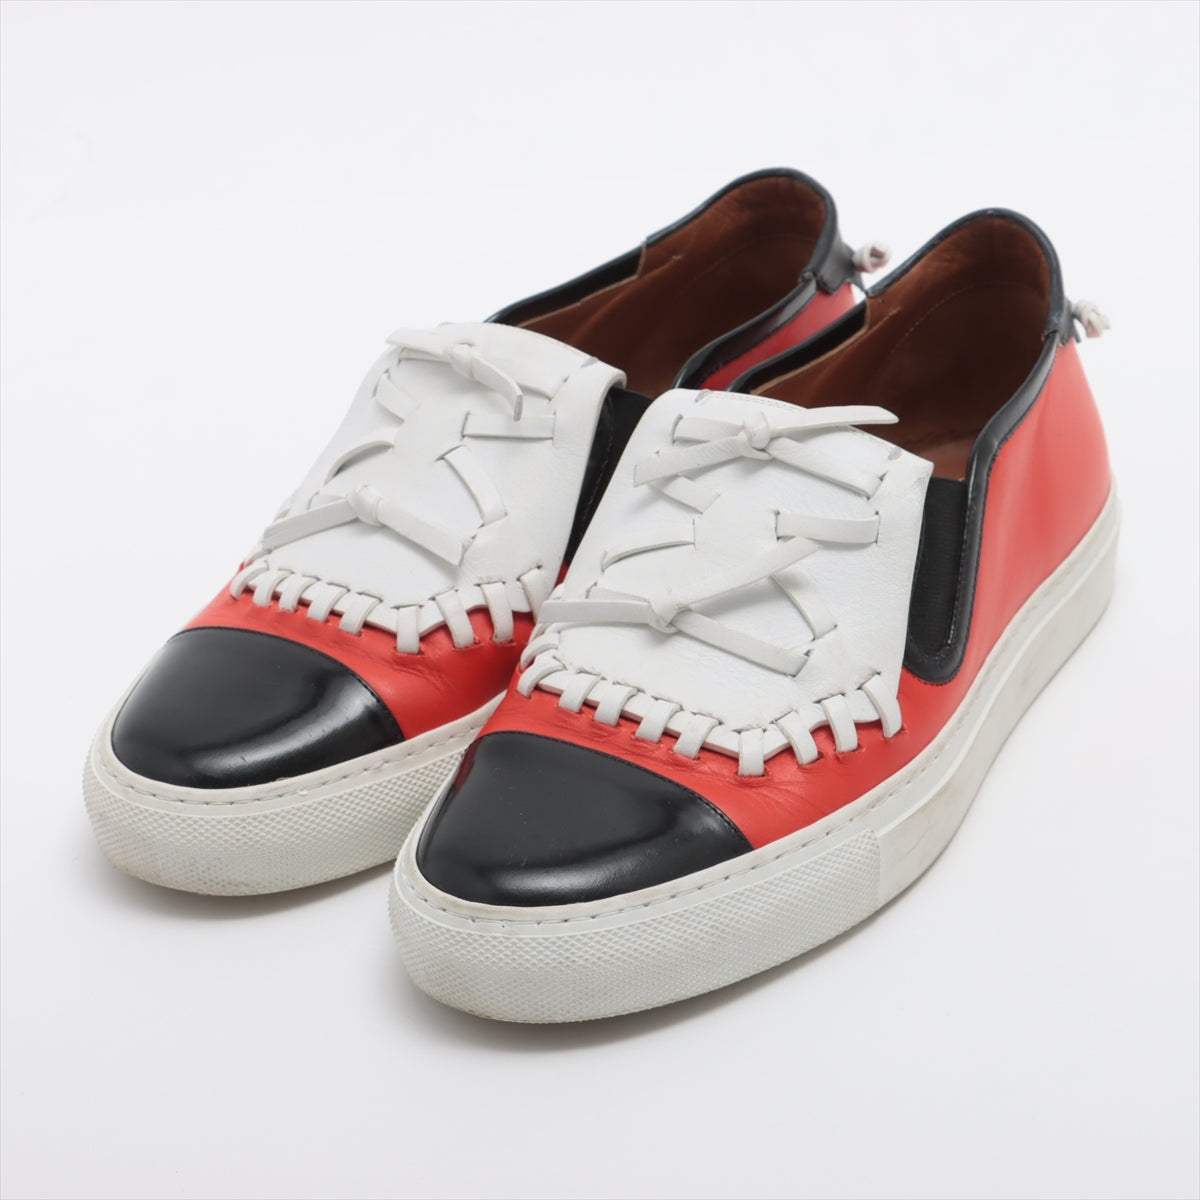 Givenchy Leather Sneakers Unknown size Ladies' Red x Black